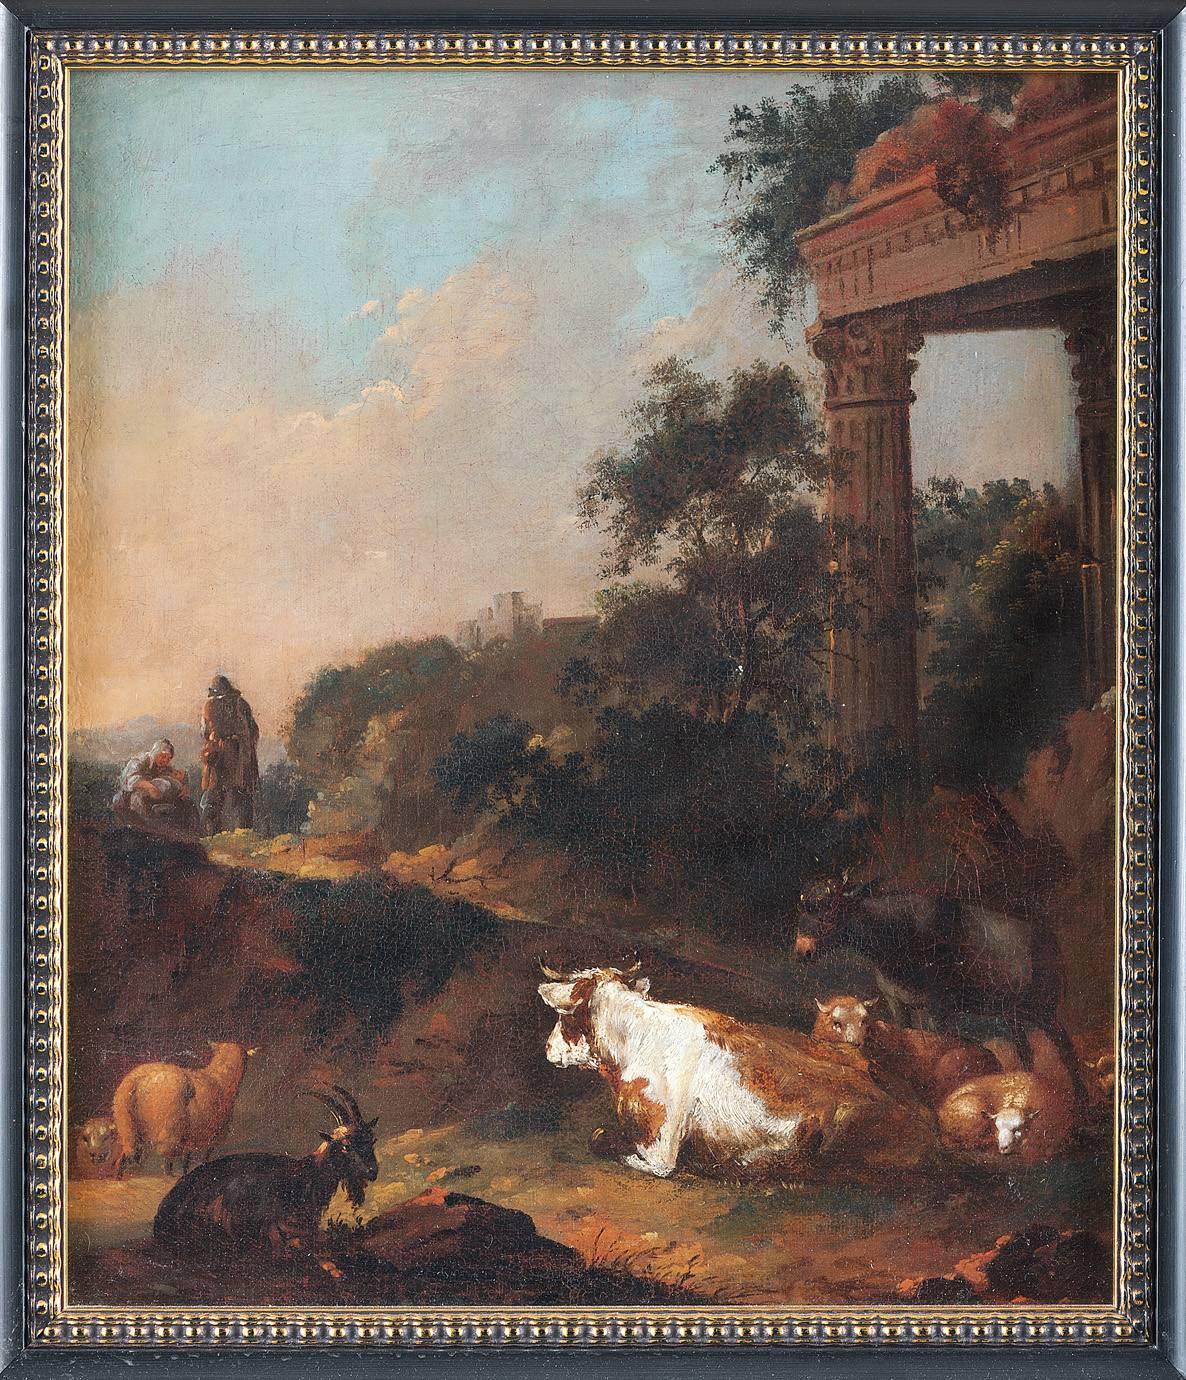 Nicolaes Berchem Landscape Painting - An Italianate Landscape Scene With Herders, Cattle And Goats